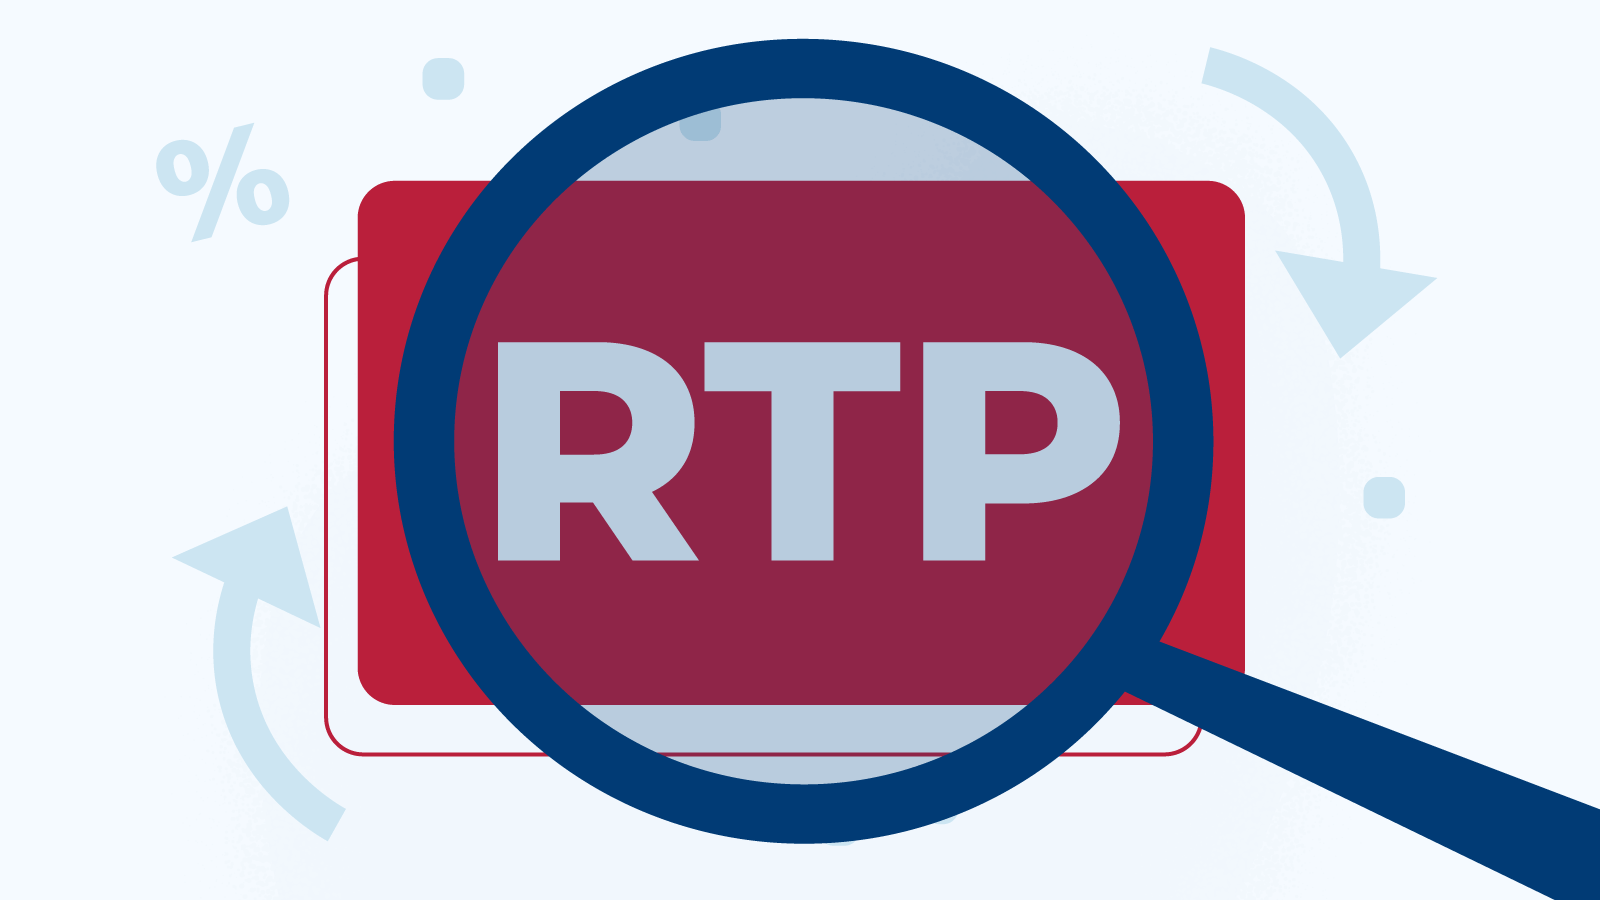 Can online casinos control the RTP